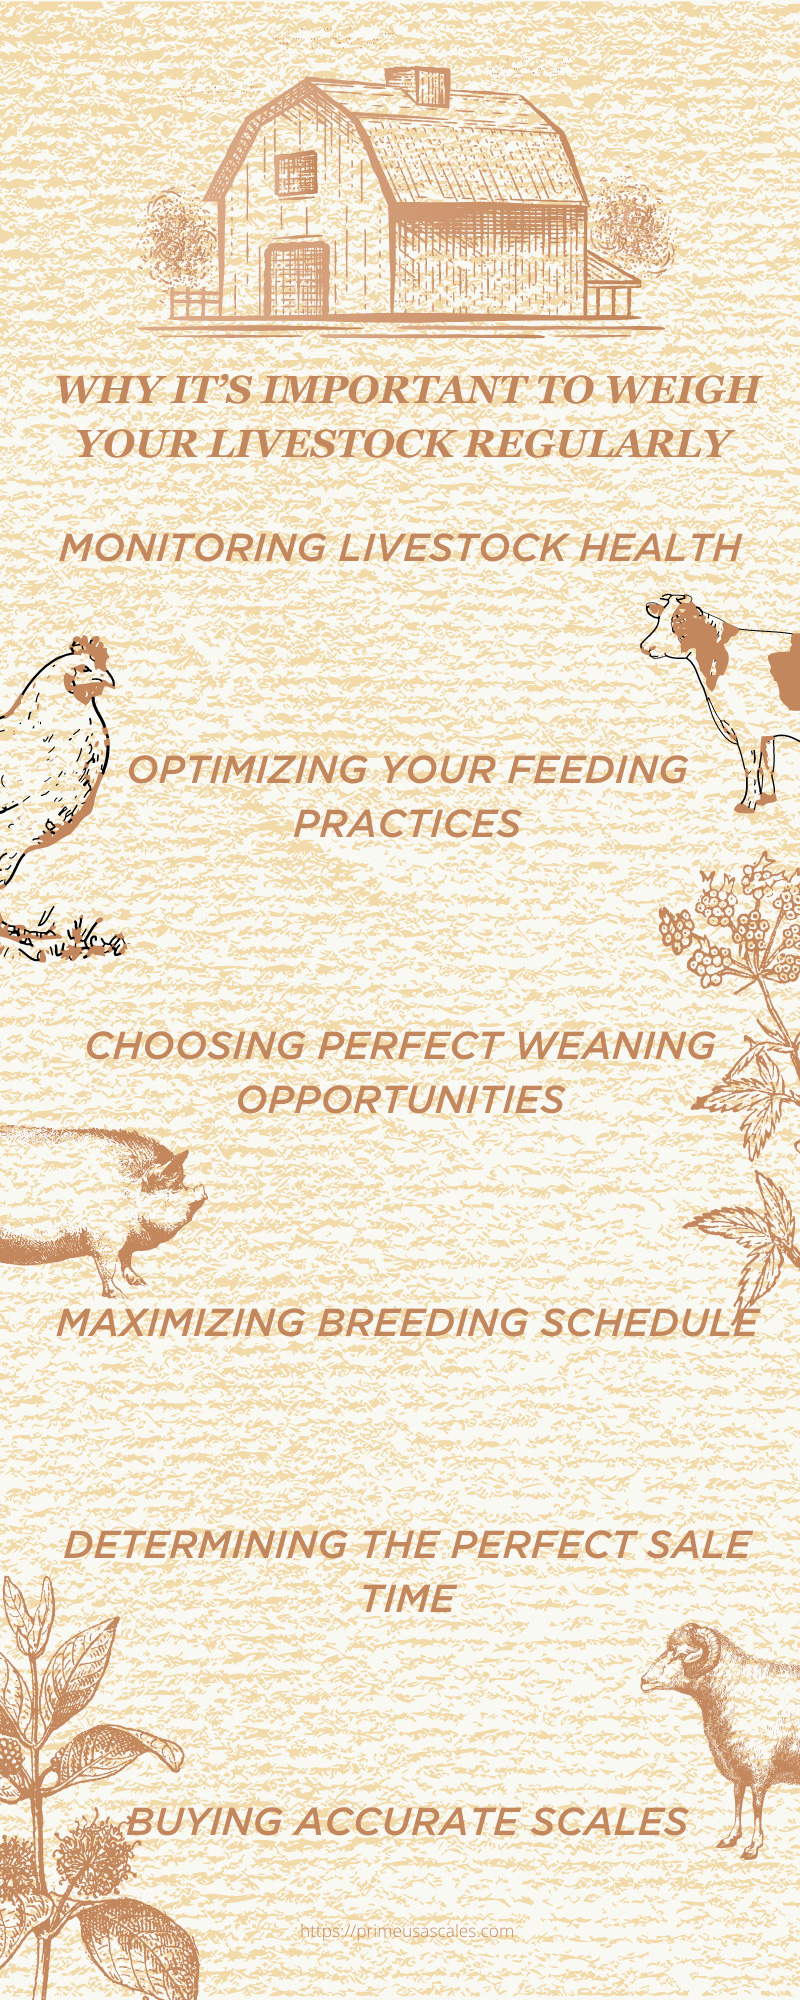 Why It’s Important To Weigh Your Livestock Regularly Infographic